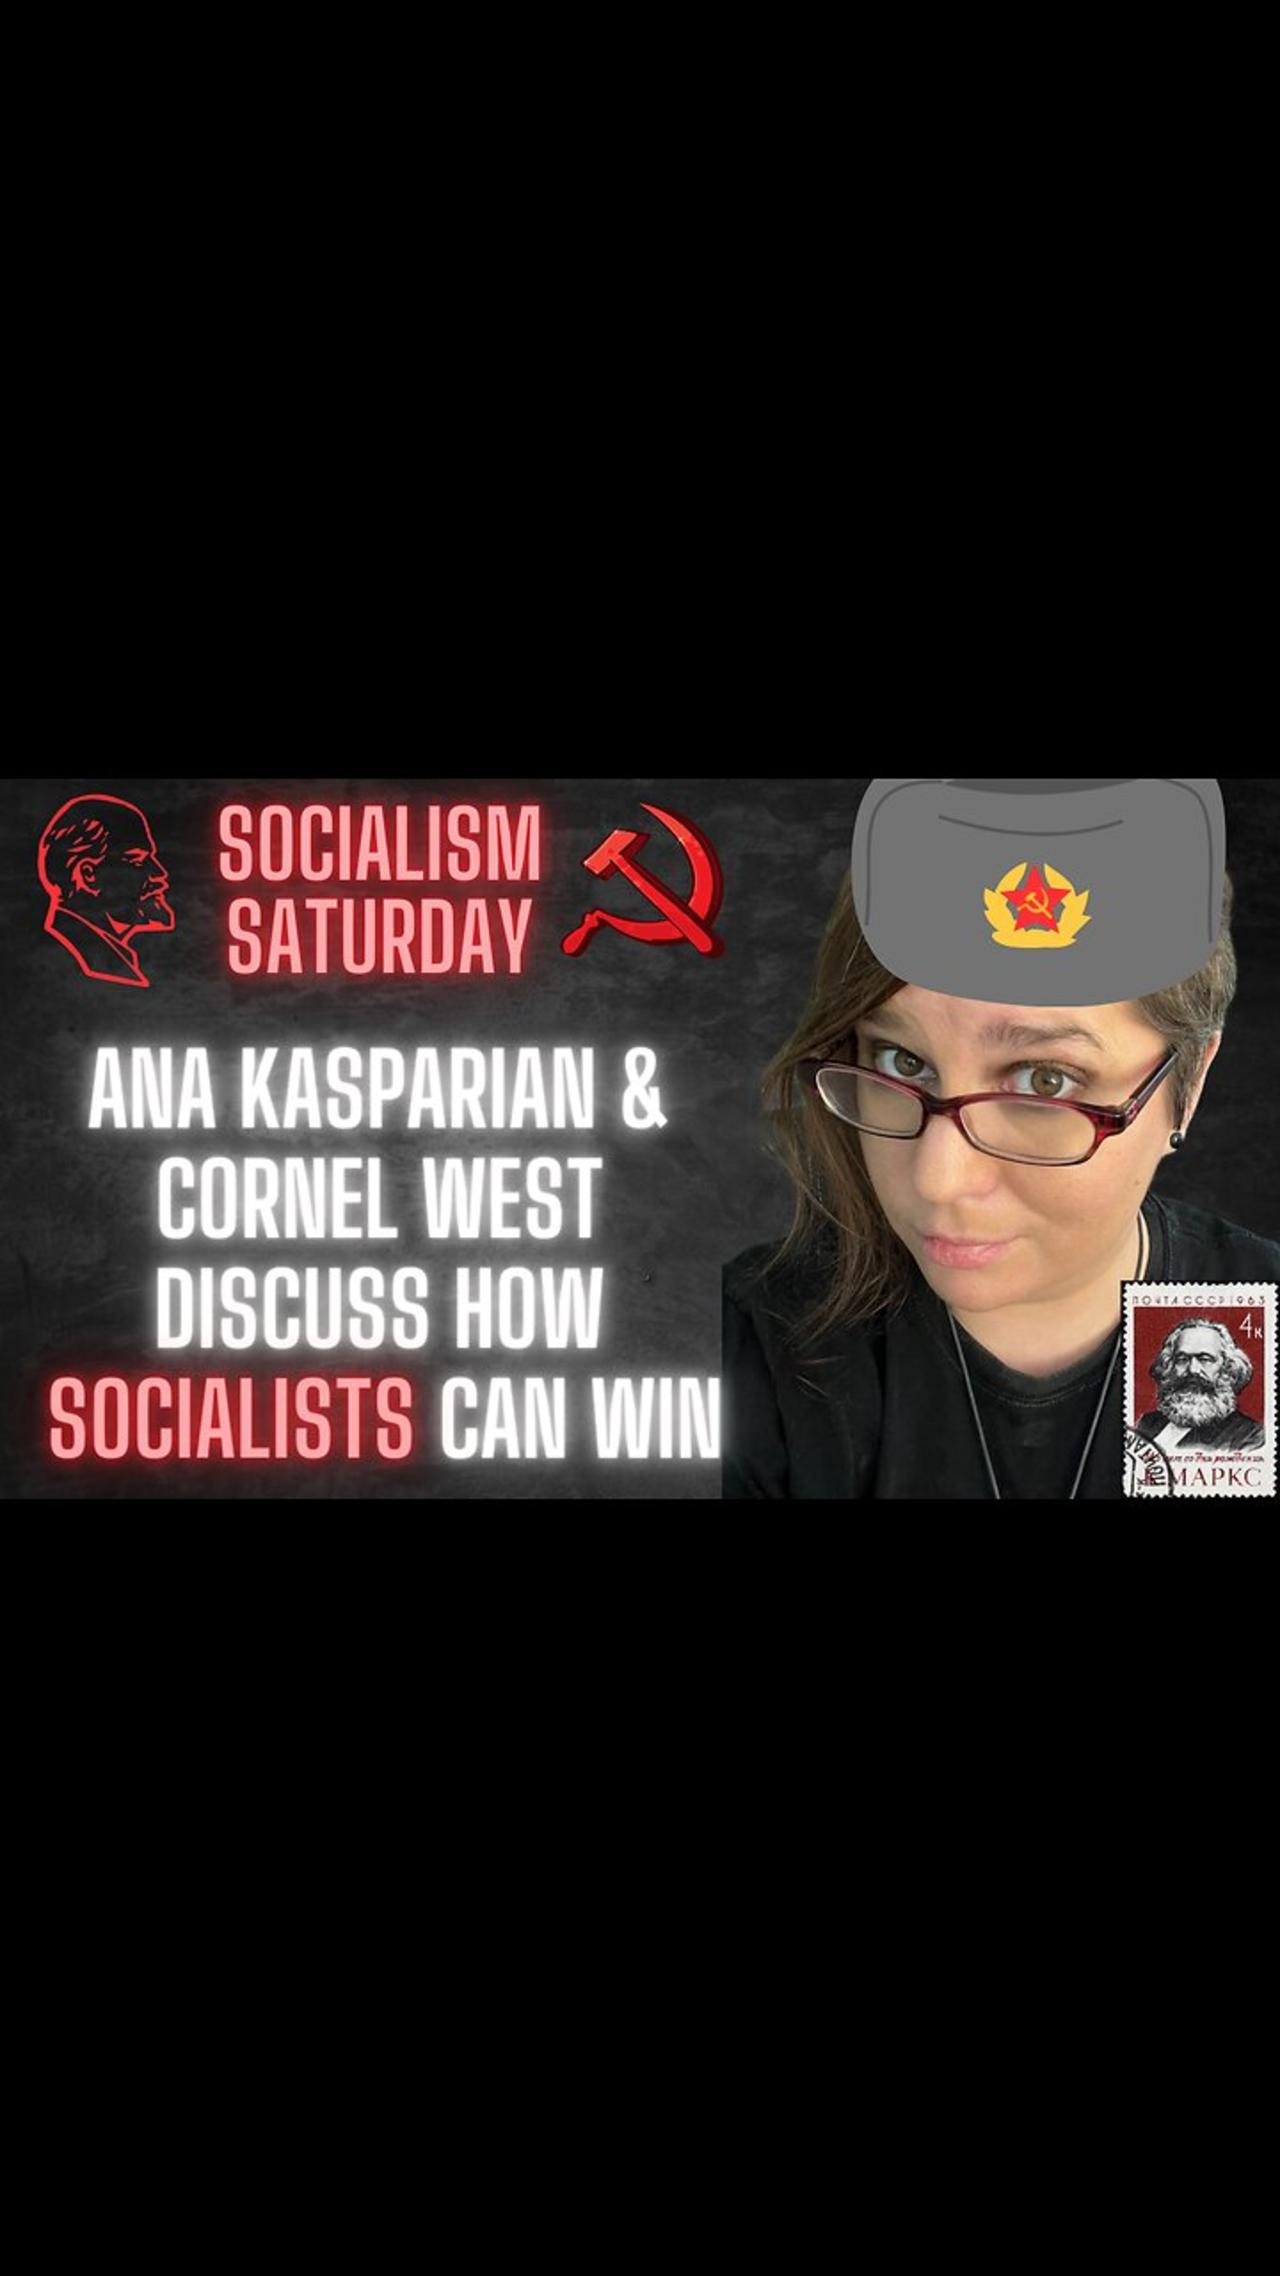 Socialism Saturday: Ana Kasparian and Cornel West discuss how SOCIALISTS can WIN in America